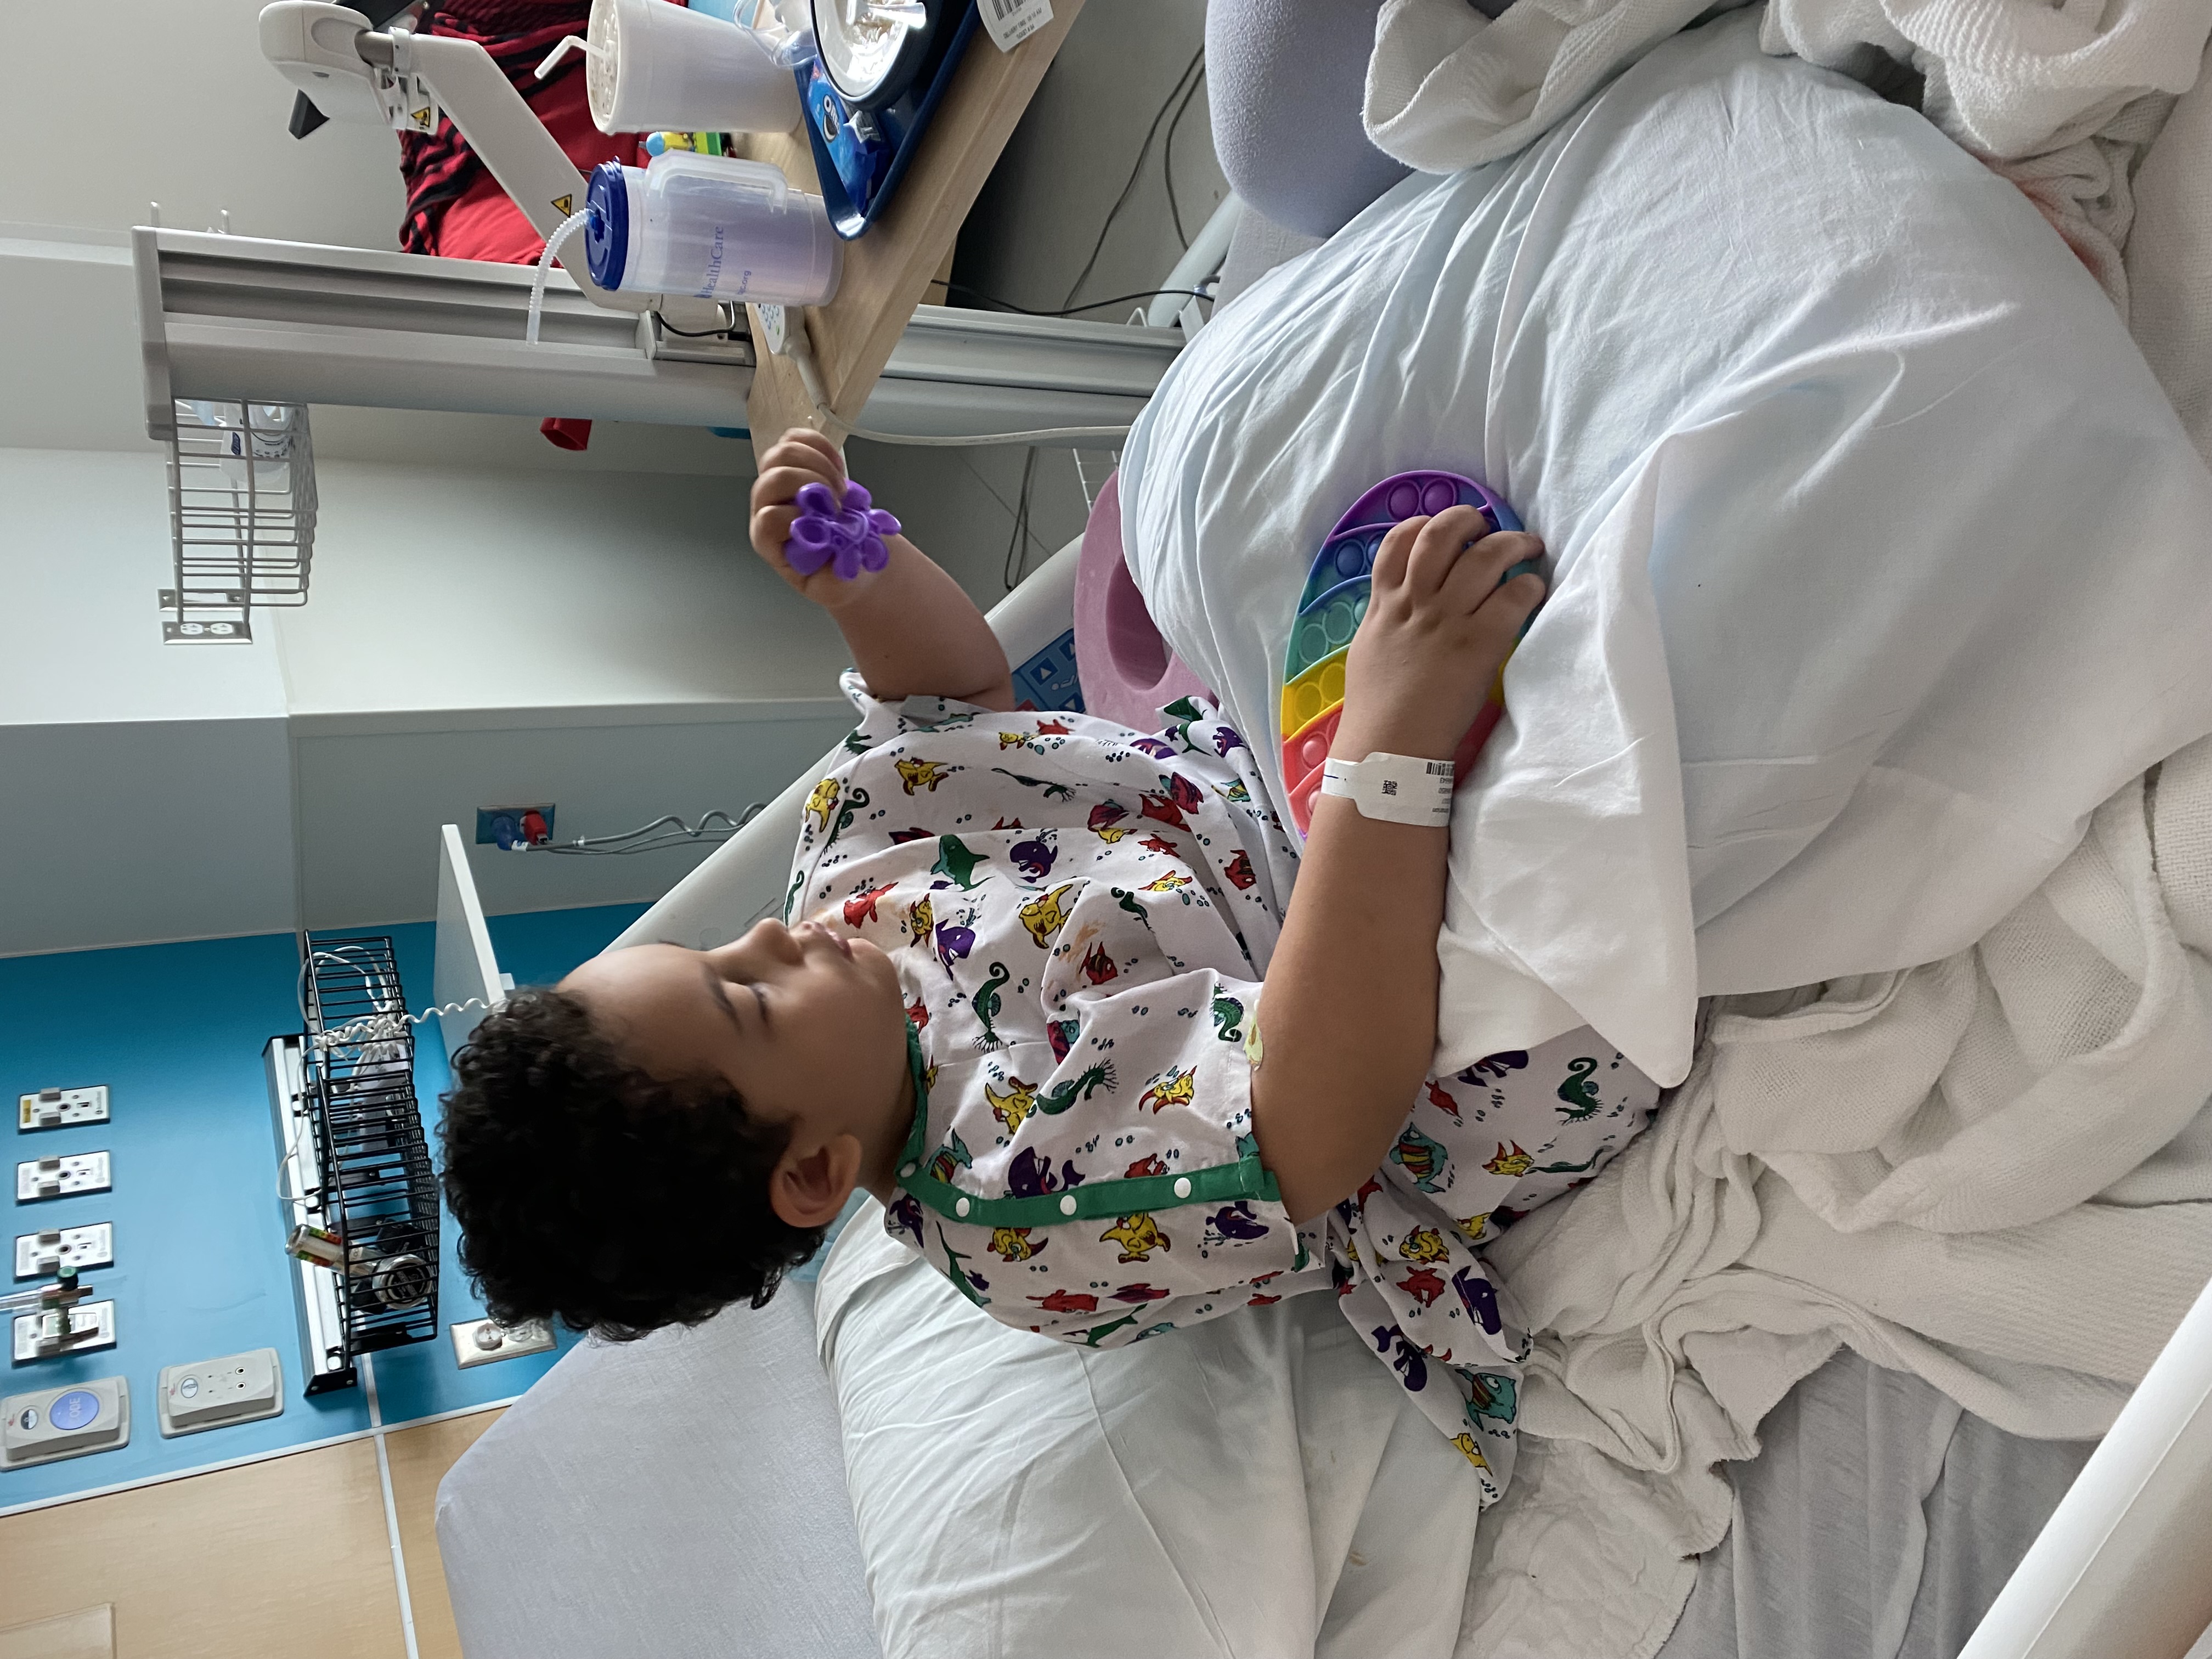 Boy in hospital bed playing with toys.